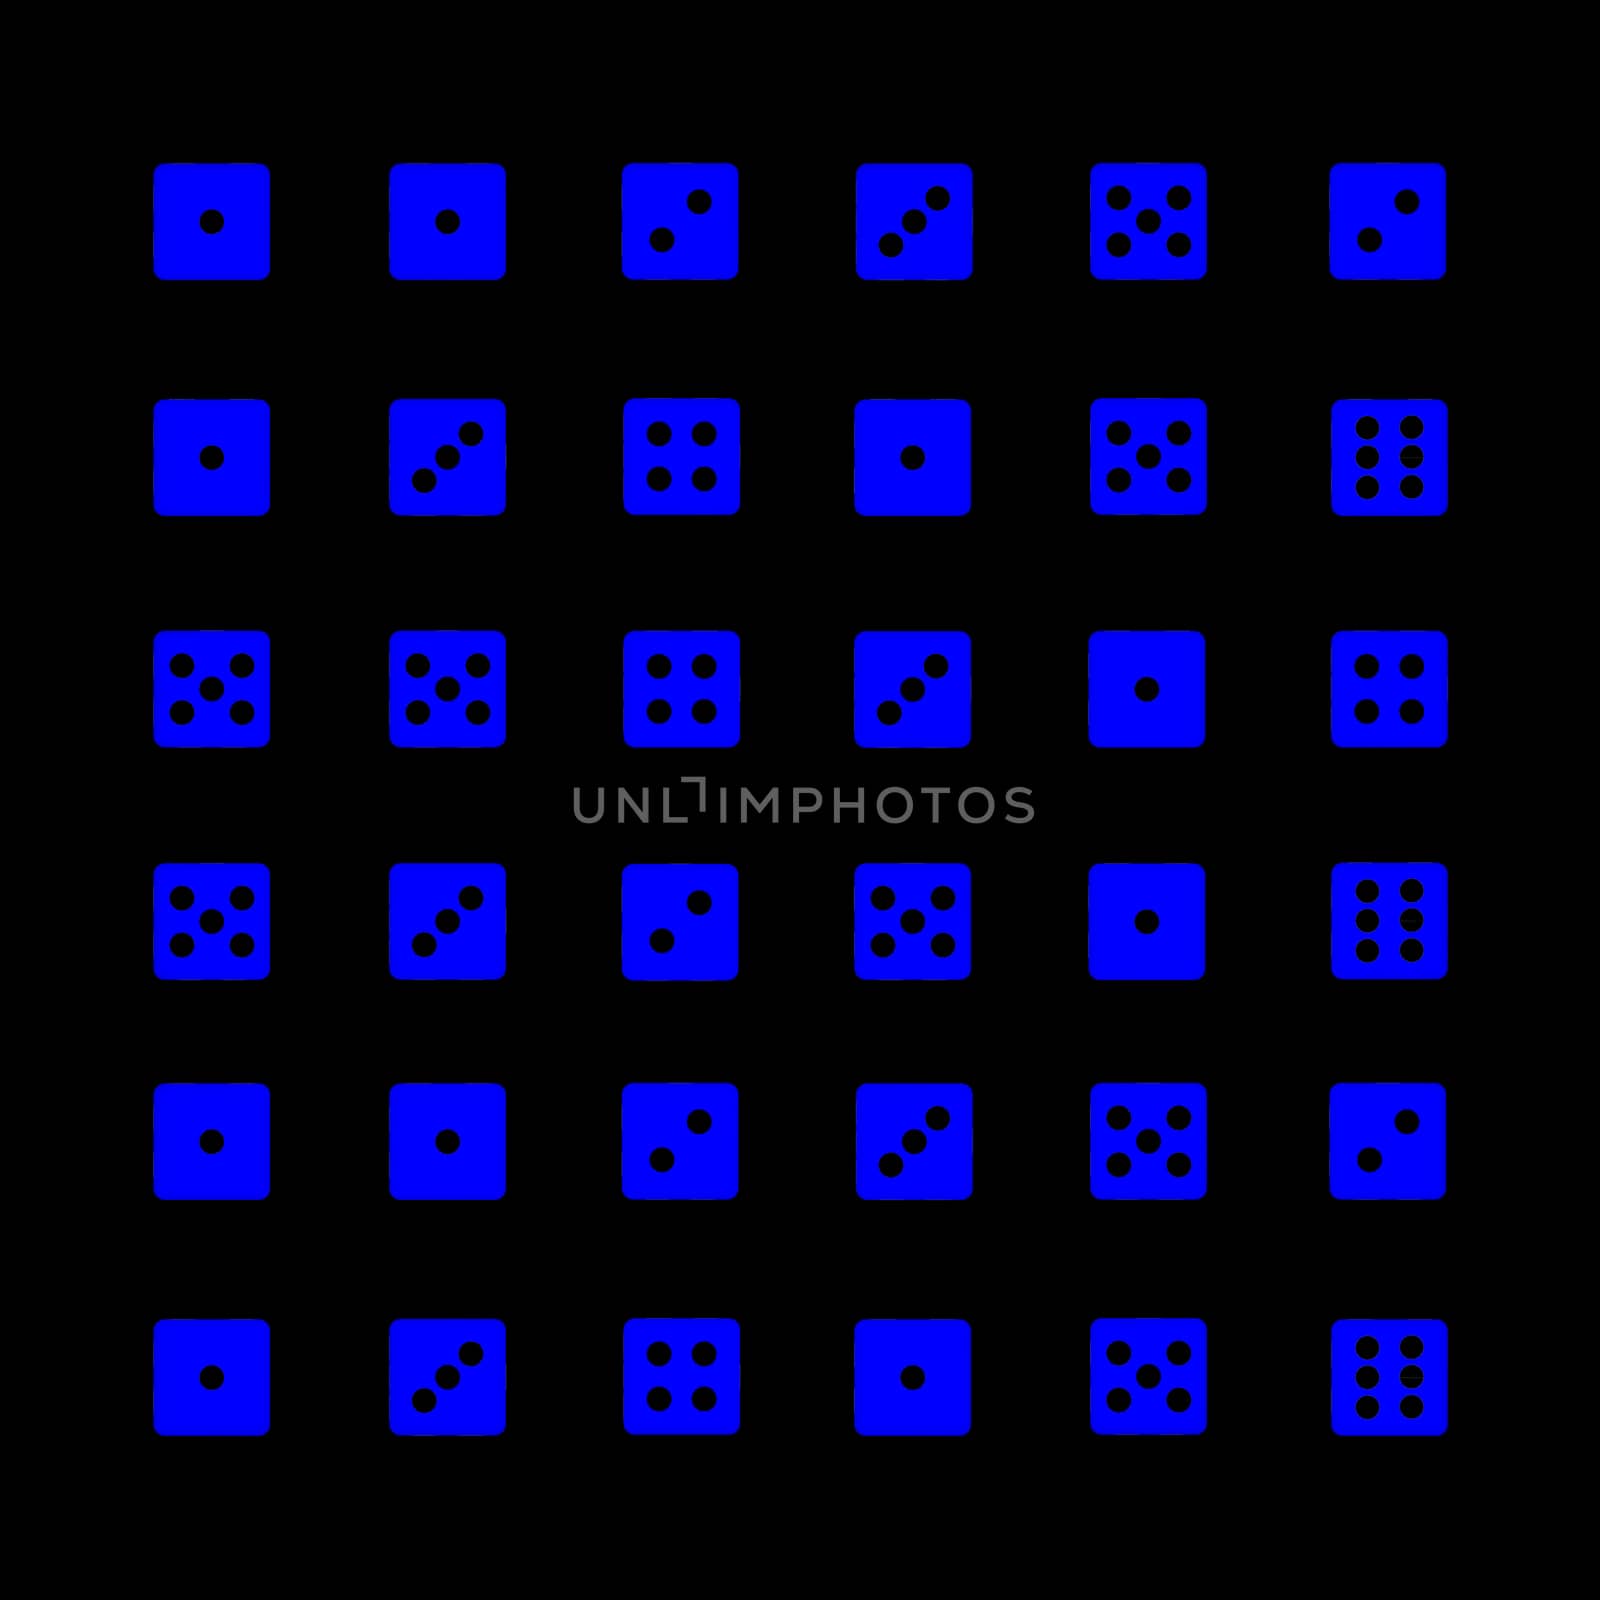 ILLUSTRATION OF ABSTRACT BACKGROUND OF PATTERN MADE WITH DICE